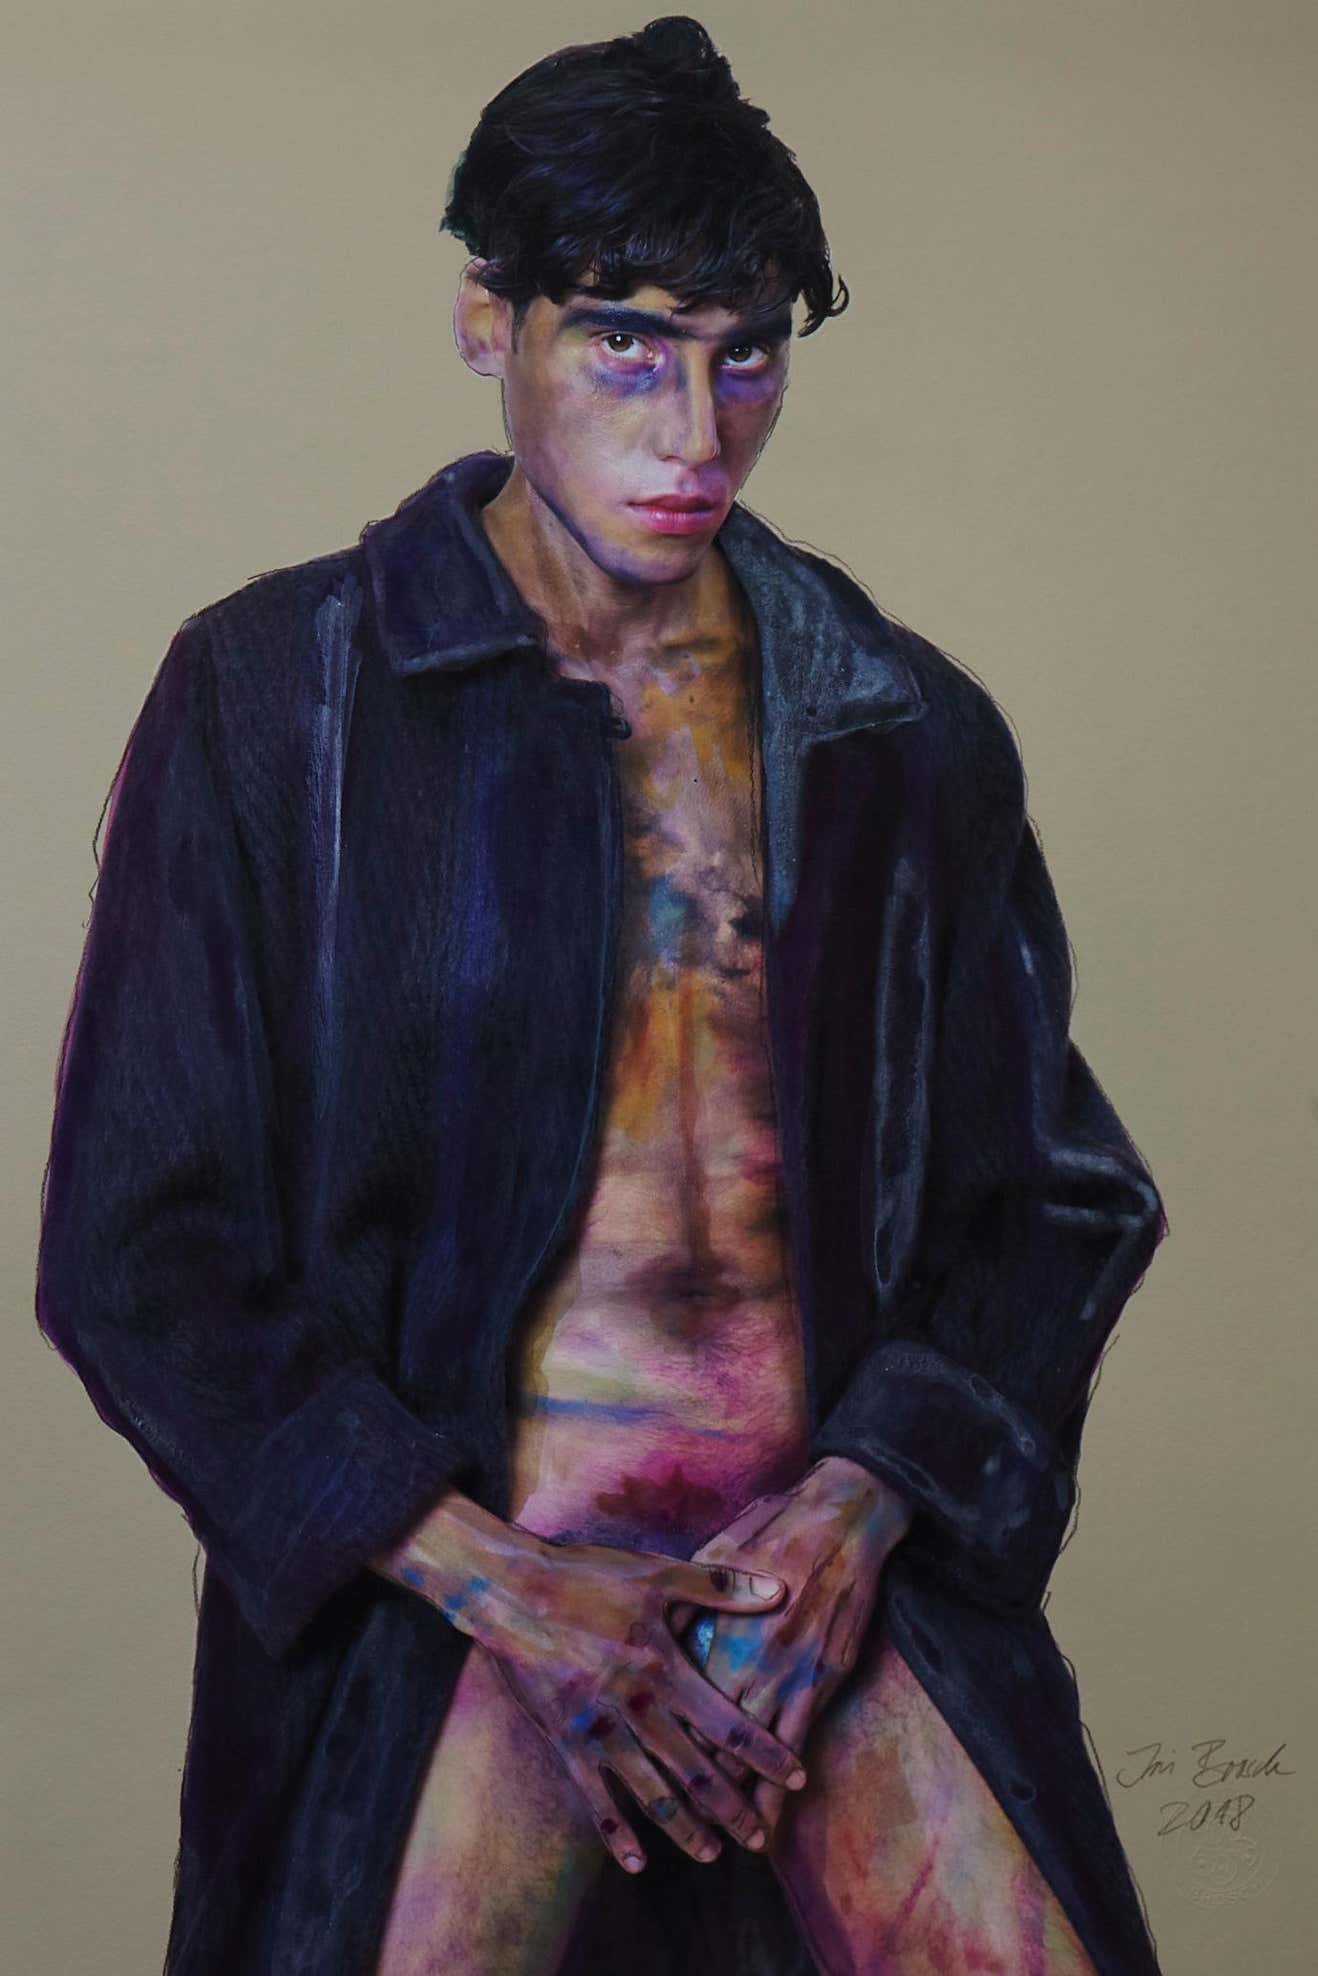 Mann mit Mantel by iris brosch, portrait of a male wearing only a blue coat covering himself with his hands, painted to look like an expressionist painting